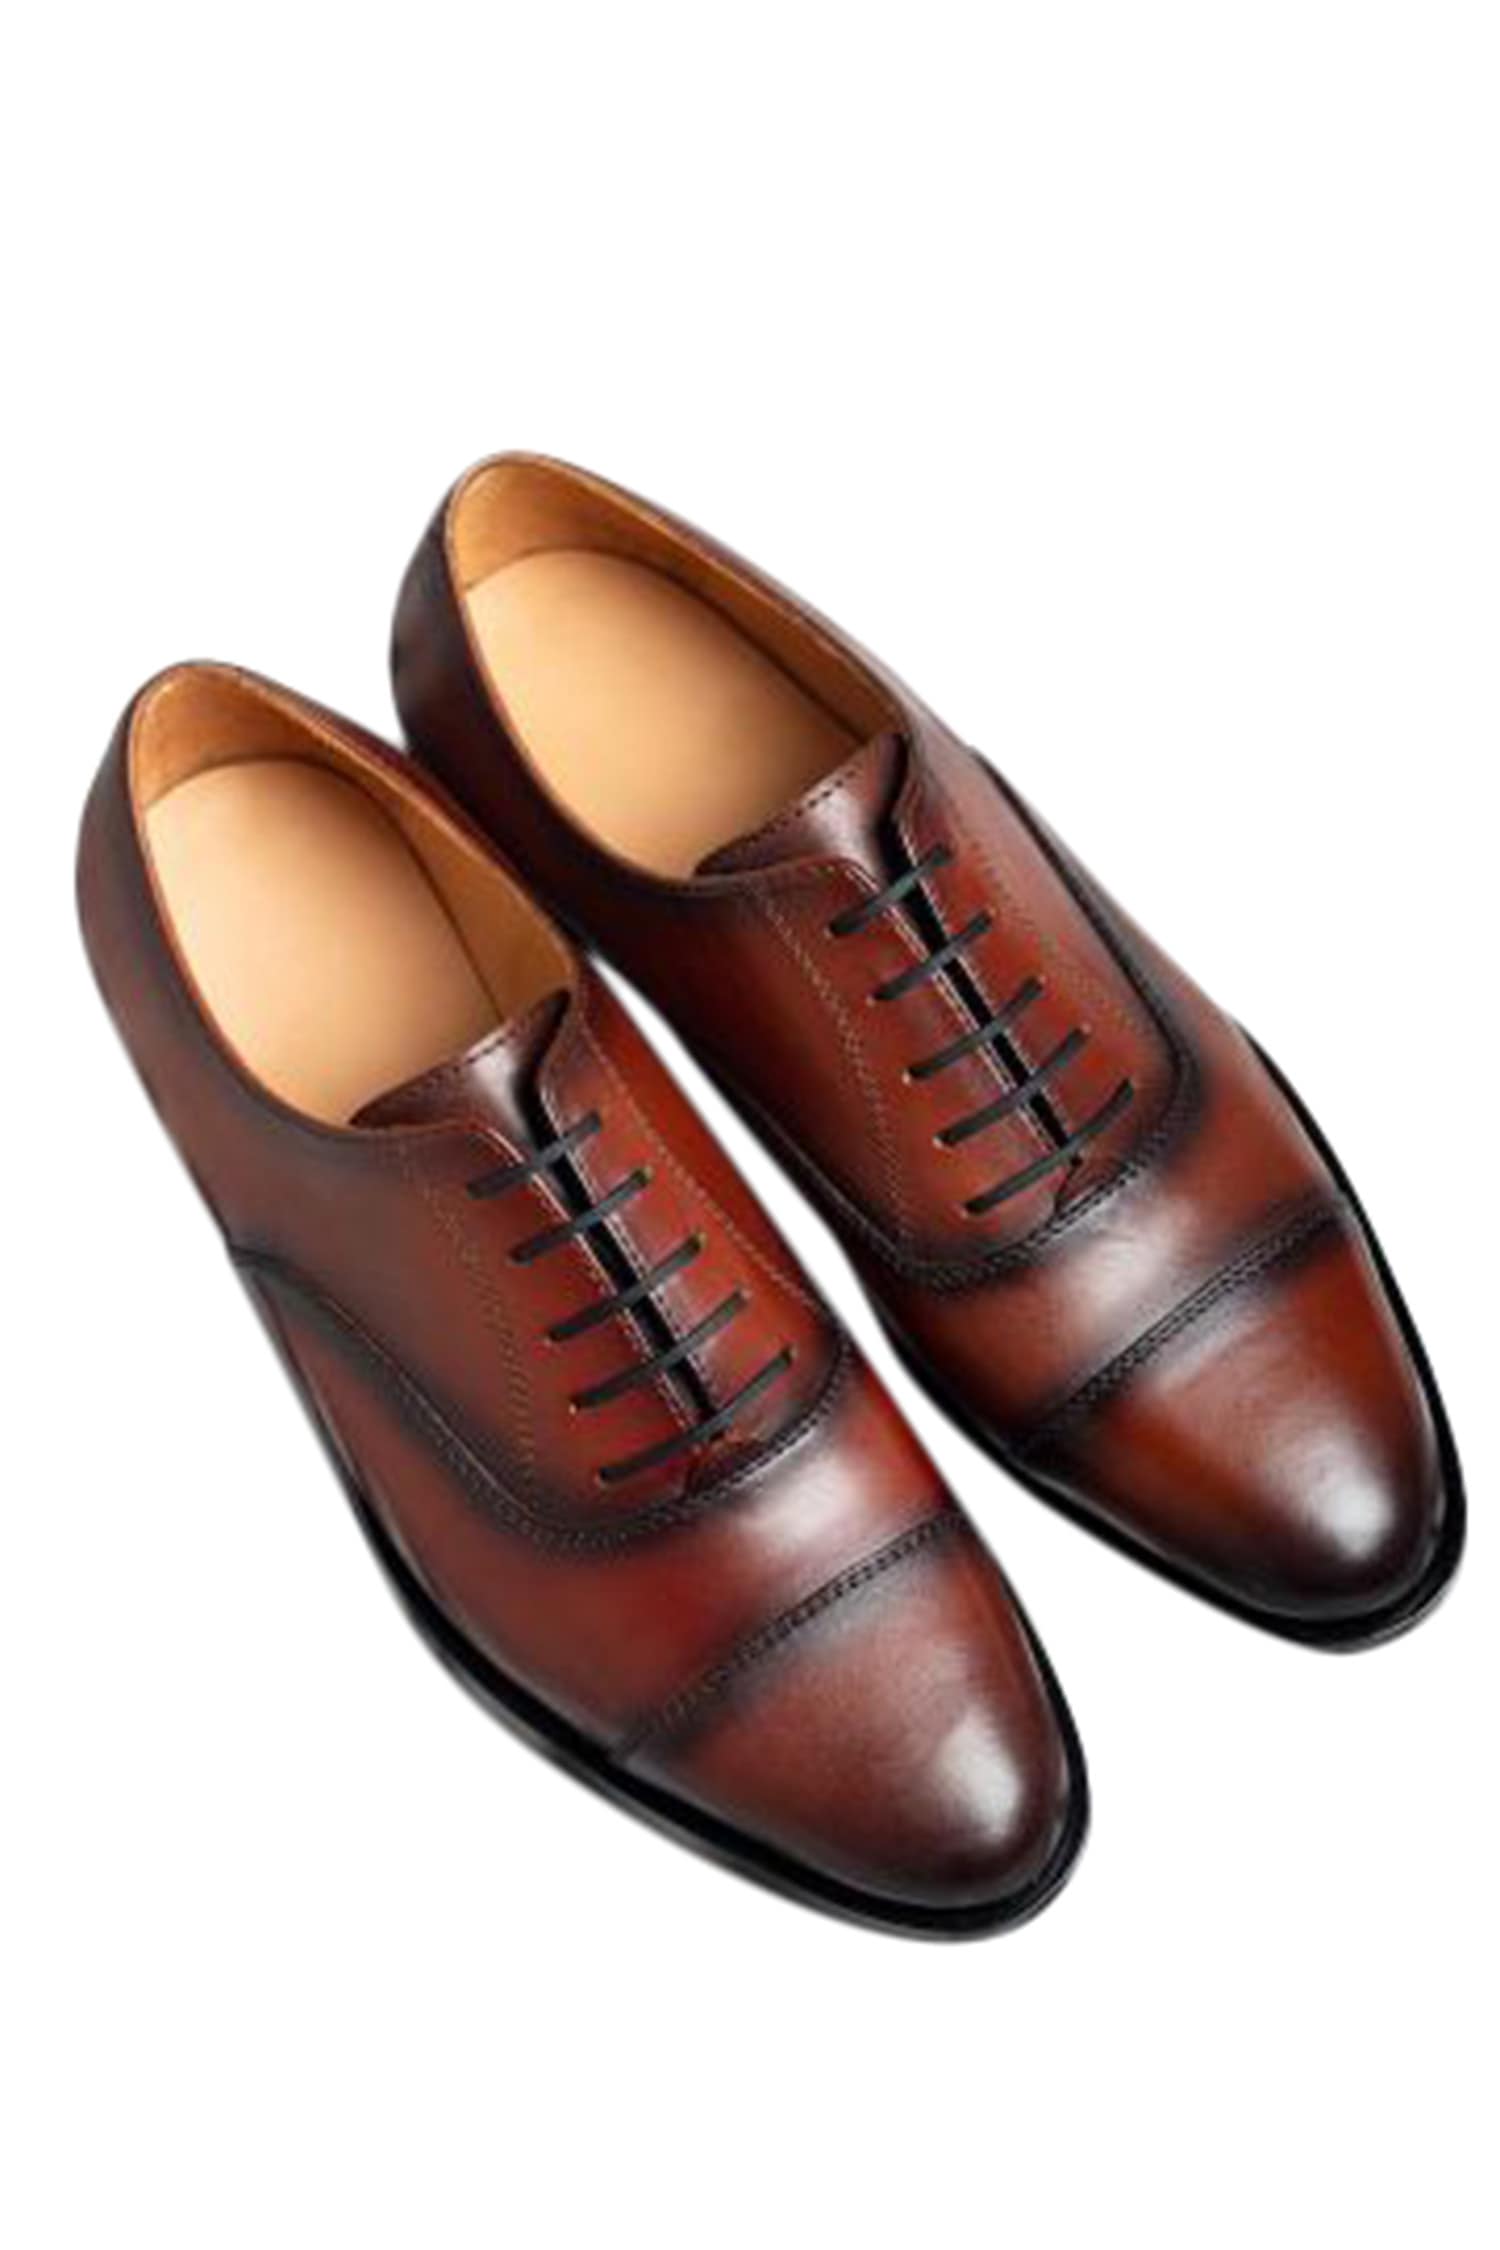 Dmodot Brown Leather Cap Toe Oxfords